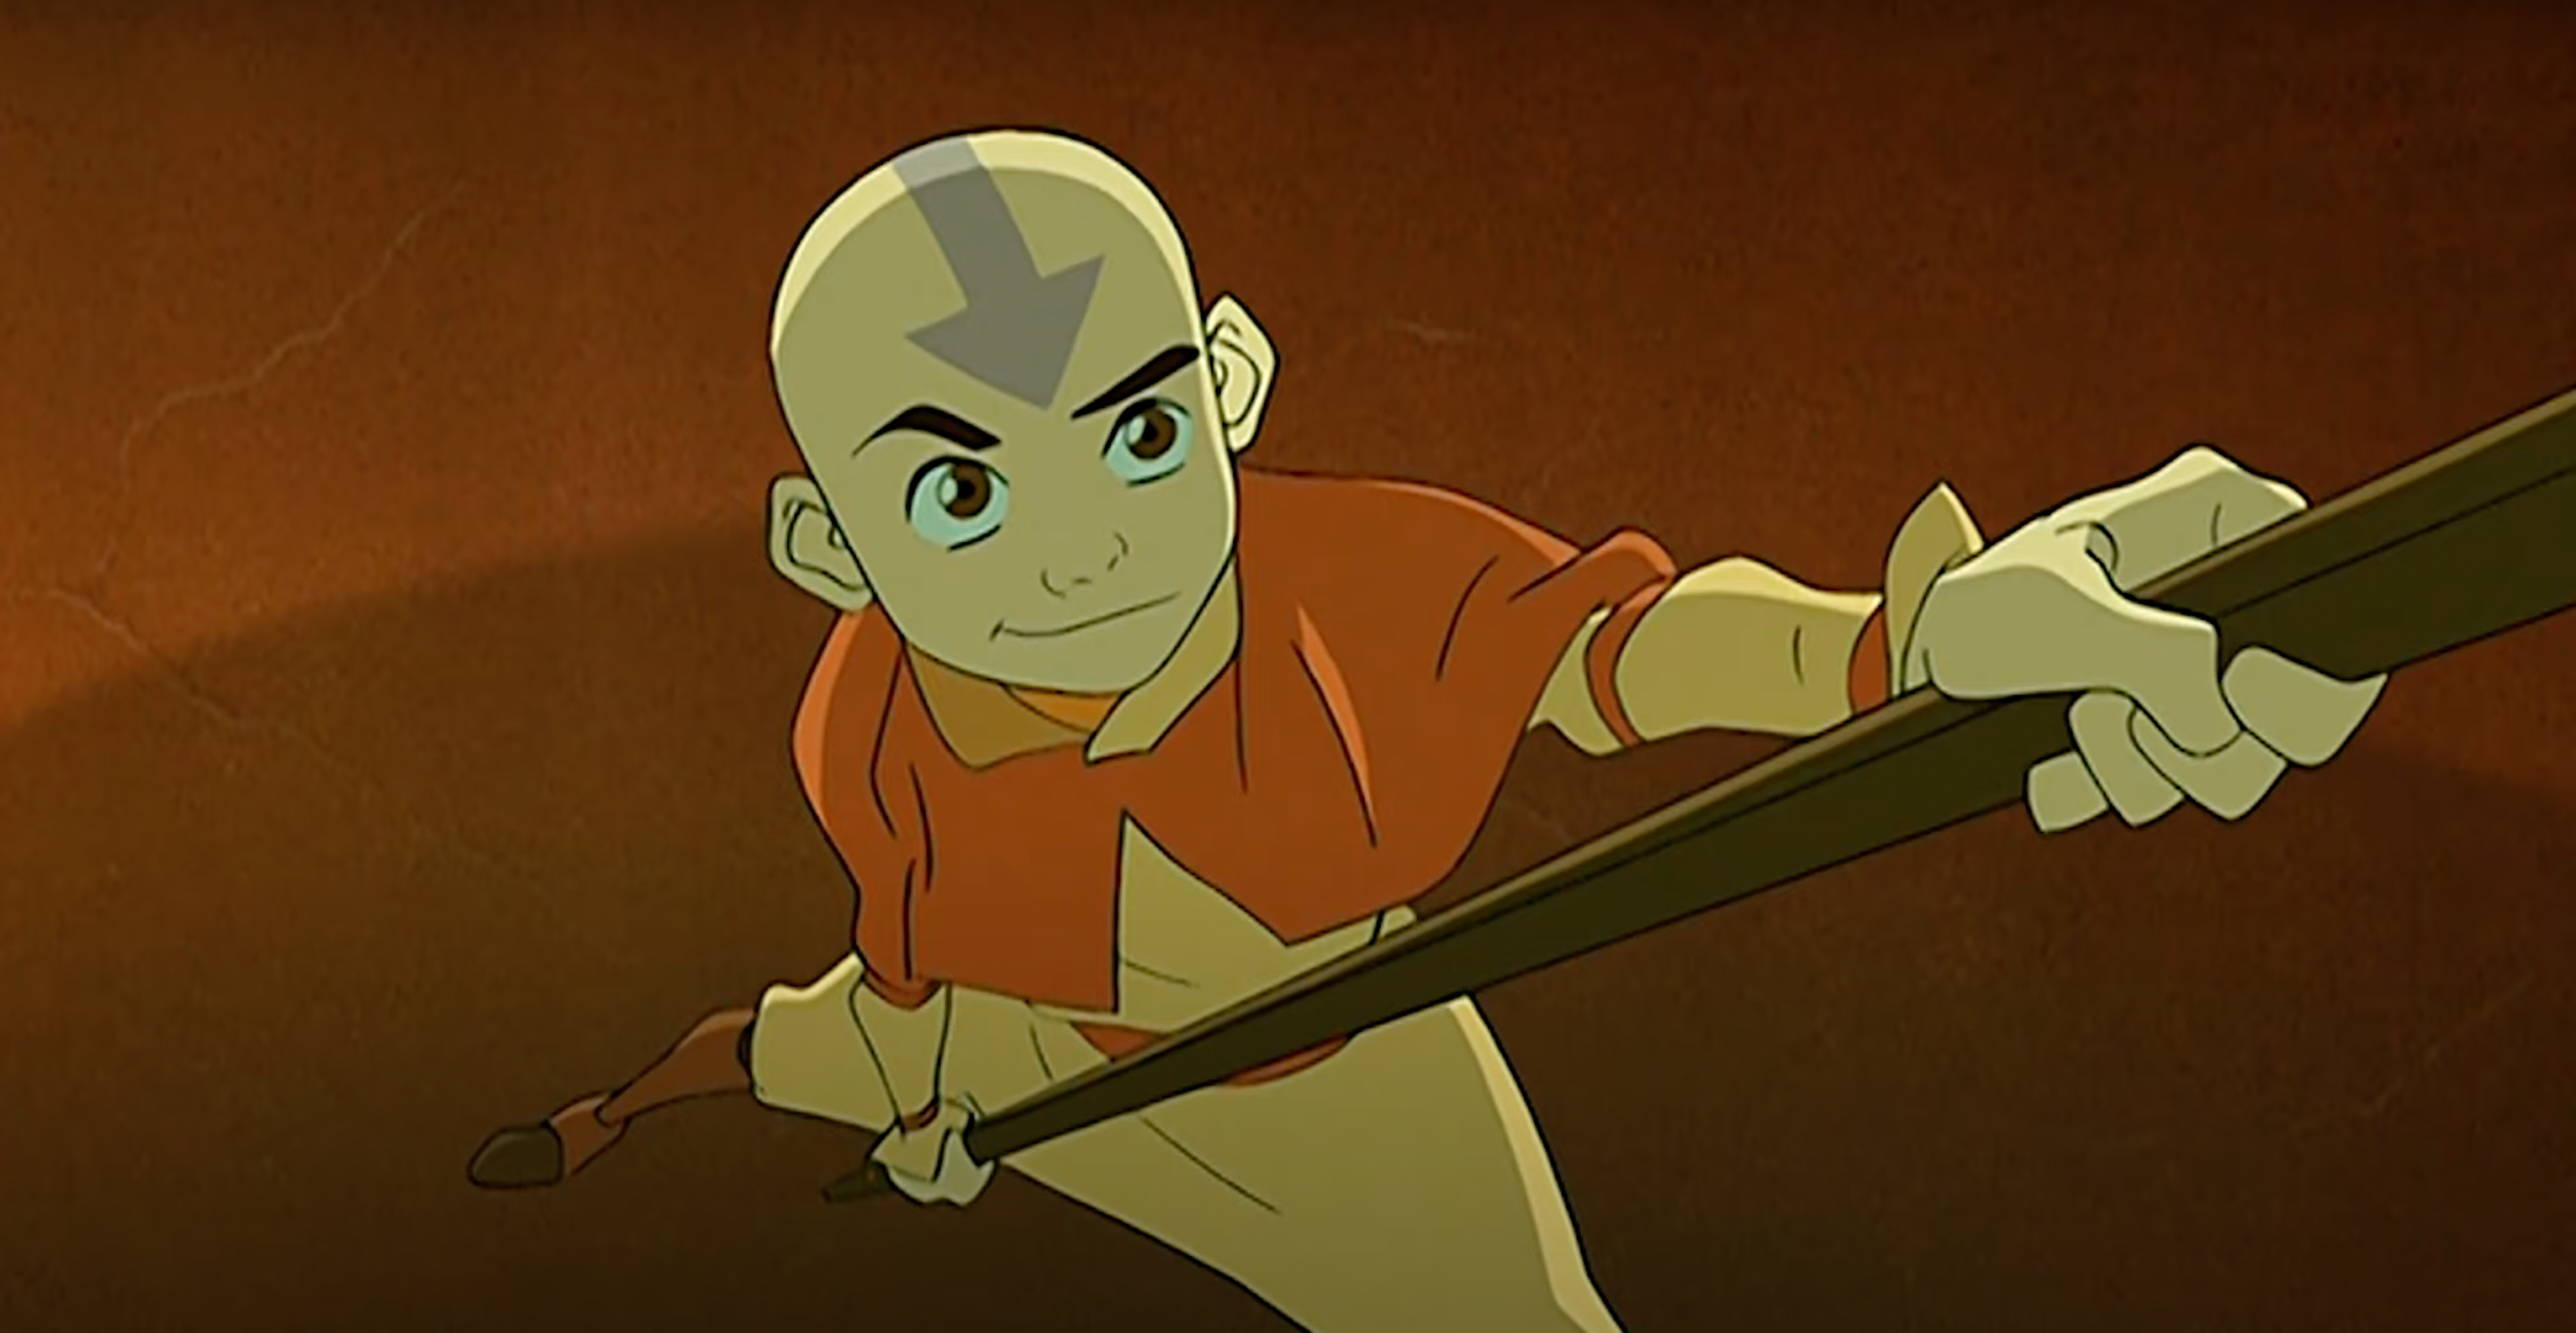 Three new Avatar: The Last Airbender films are in the works at Paramount and Nickelodeon